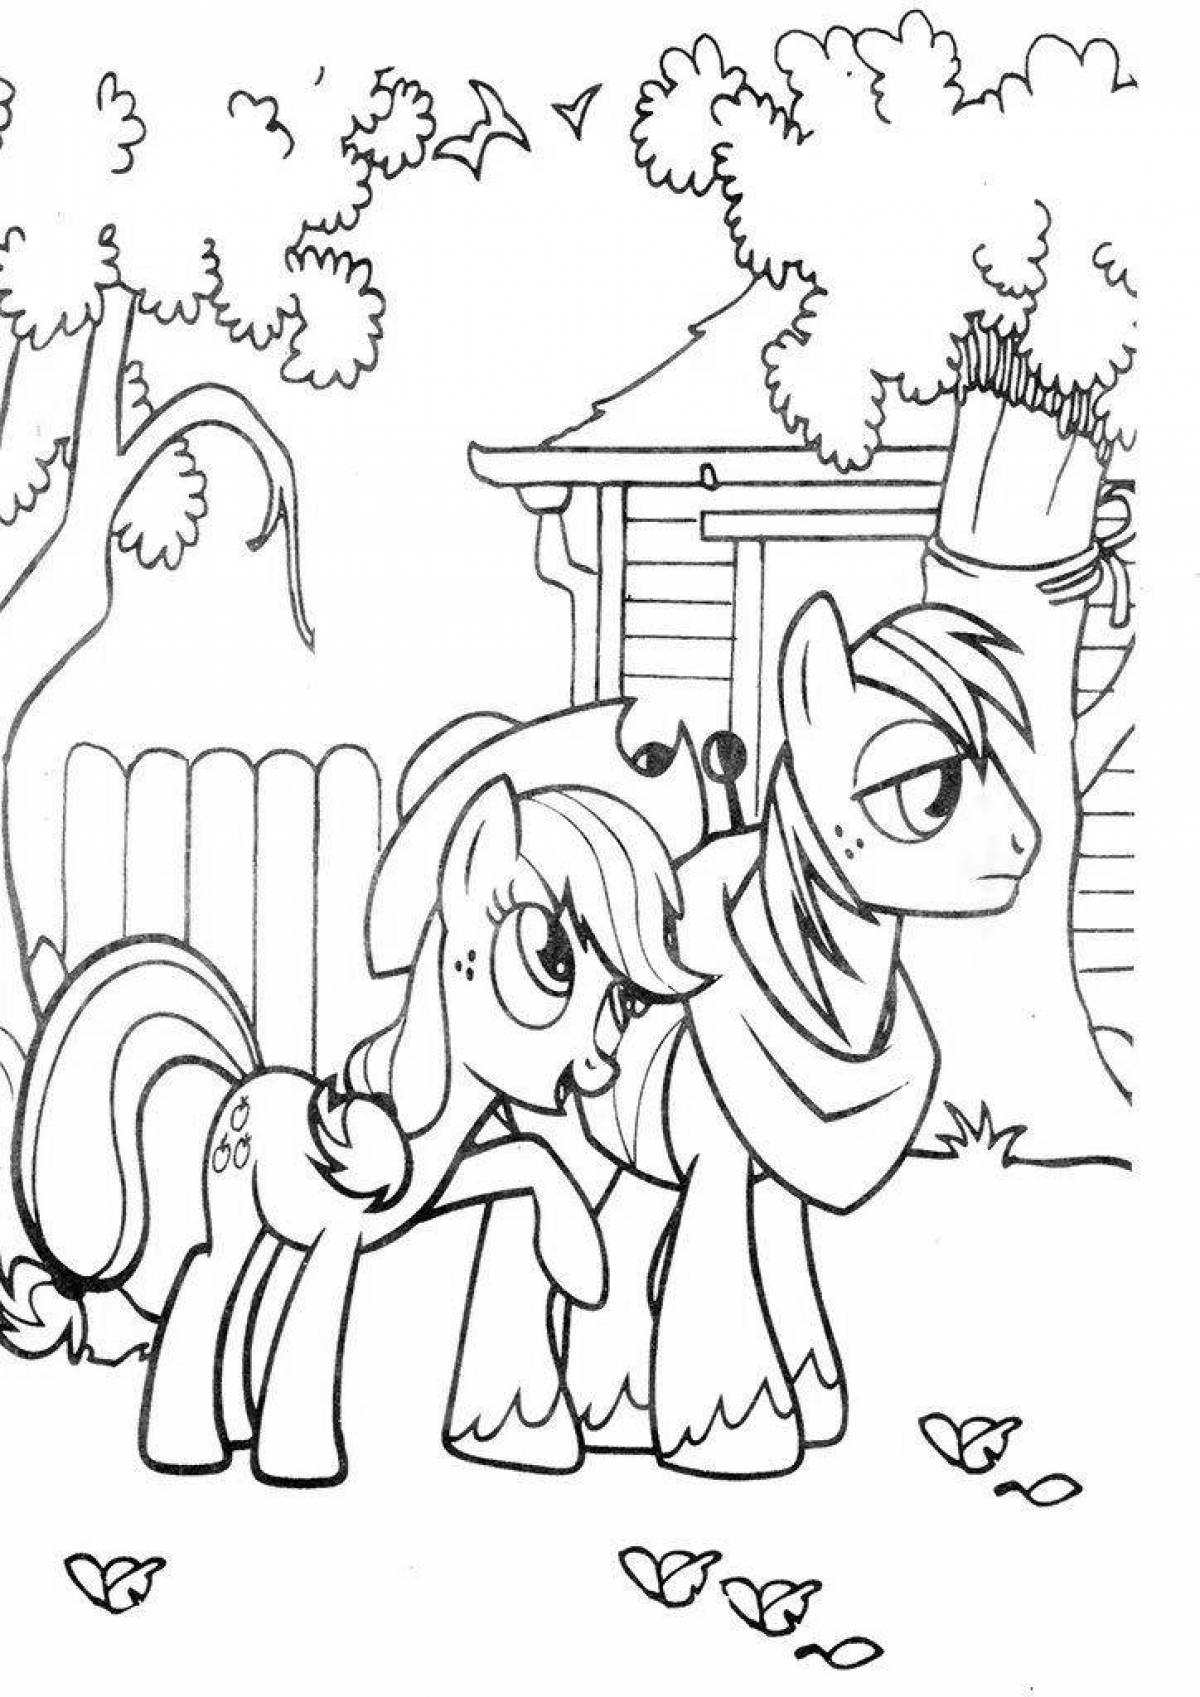 Great pony town coloring book